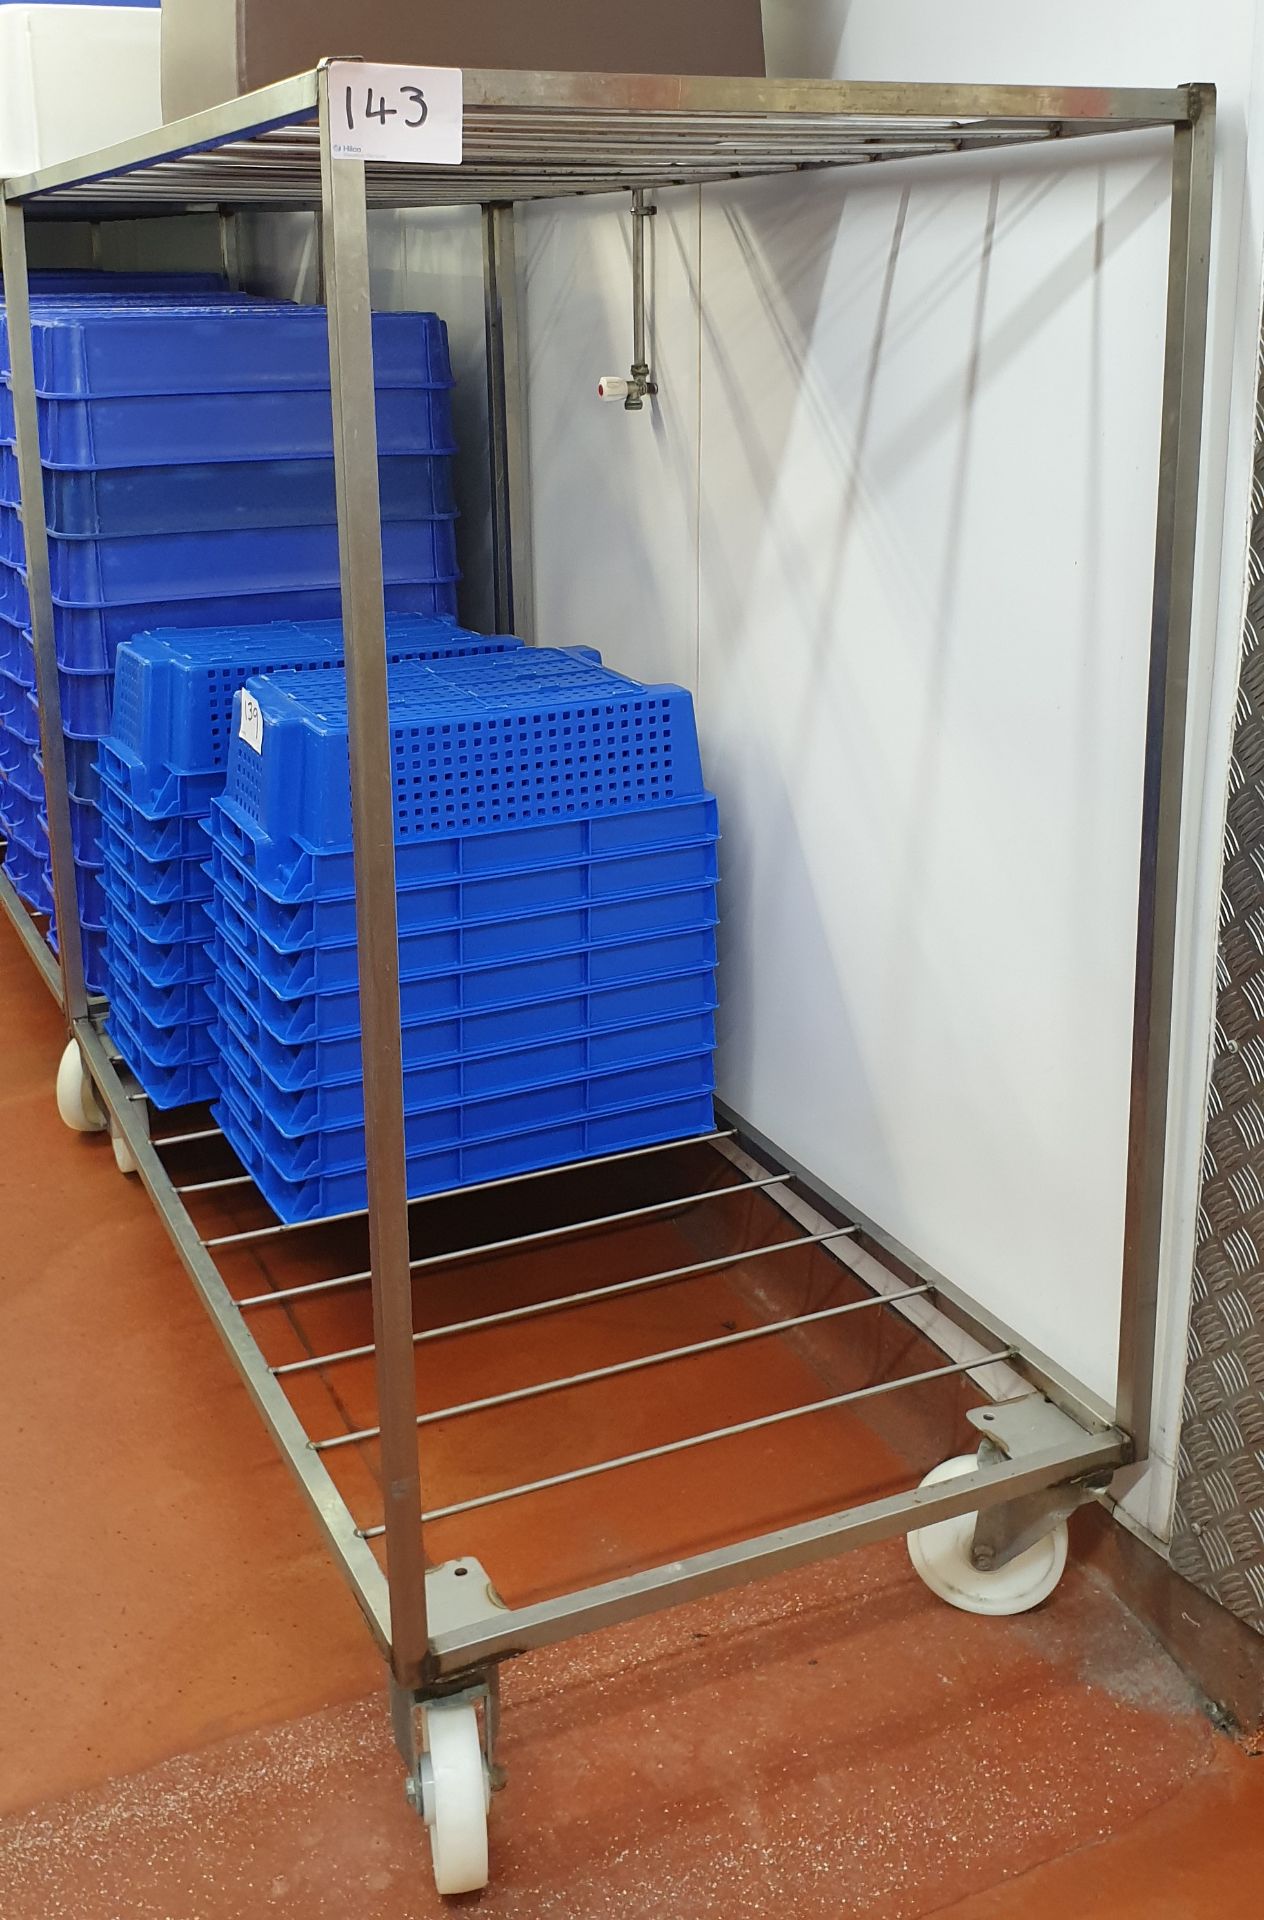 3 x Stainless Steel Tray Racking Units, 1.67m(l), 0.76m(w) x 1.47m(h), Plastic Bins Not Included,